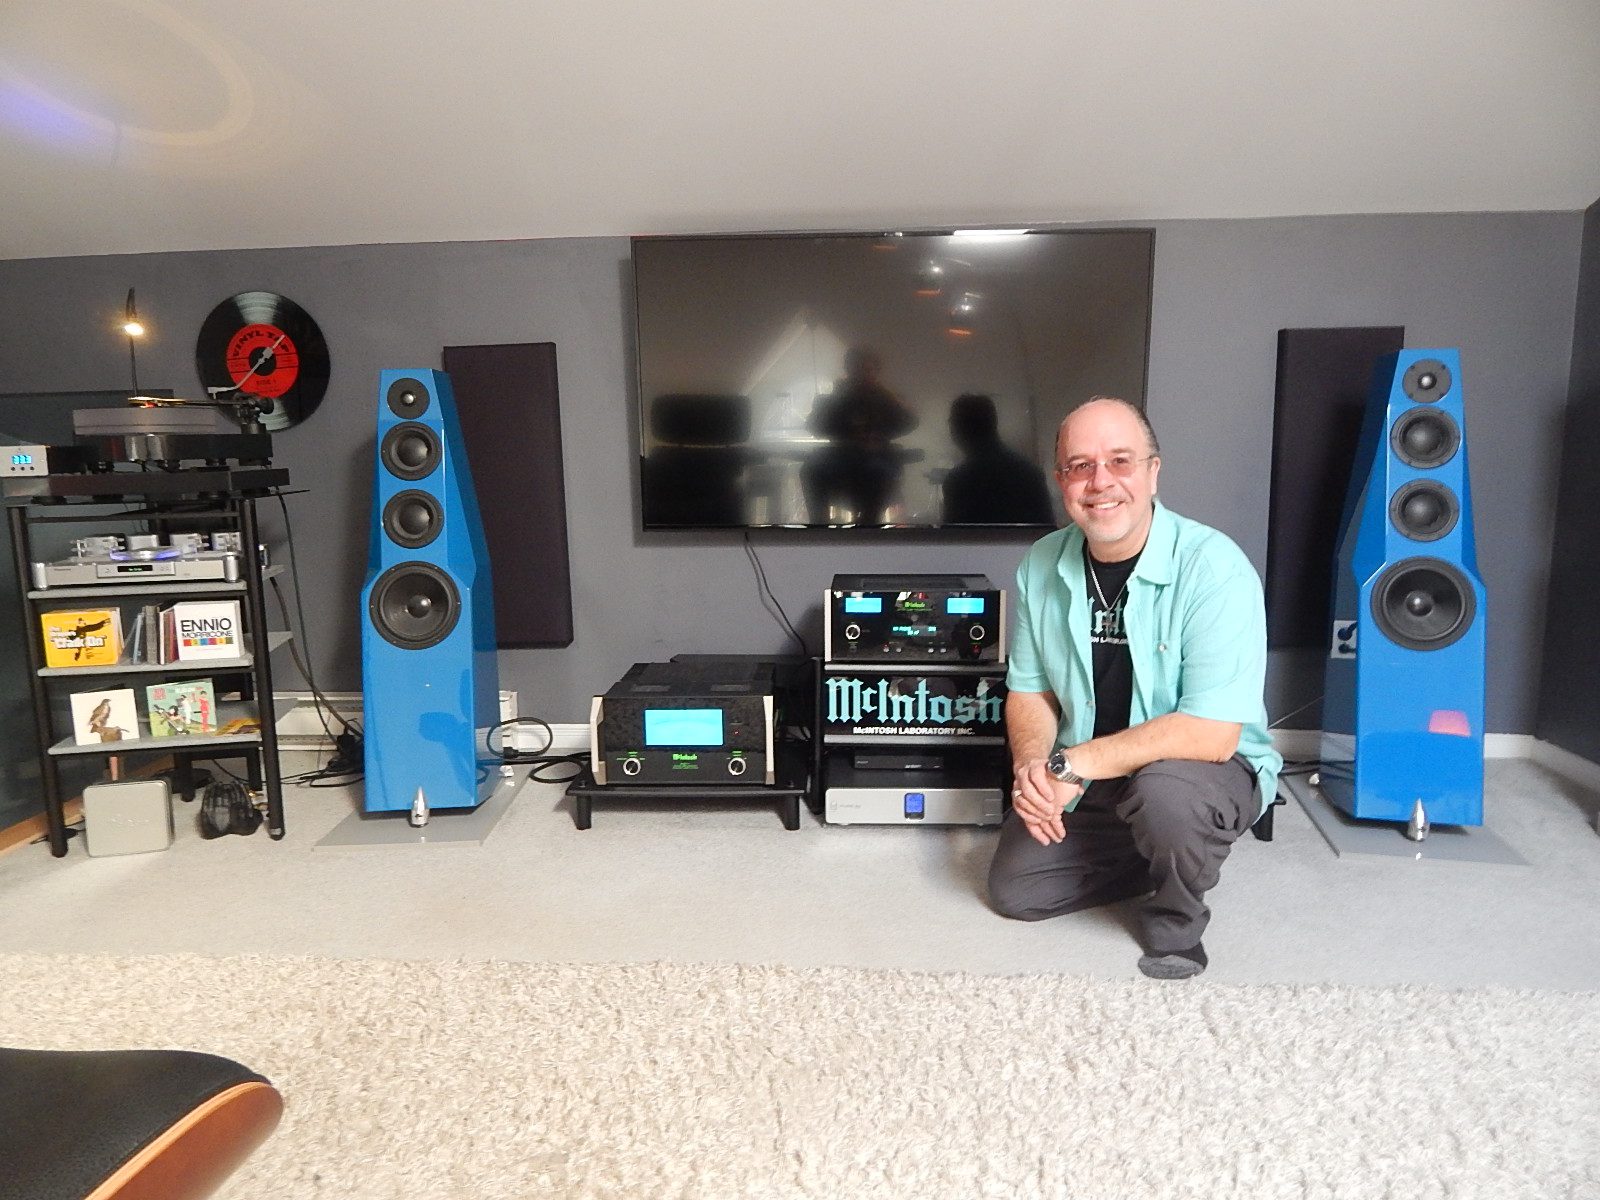 “No, I have the best system in the world!”: The Musical Match Between Totem and McIntosh